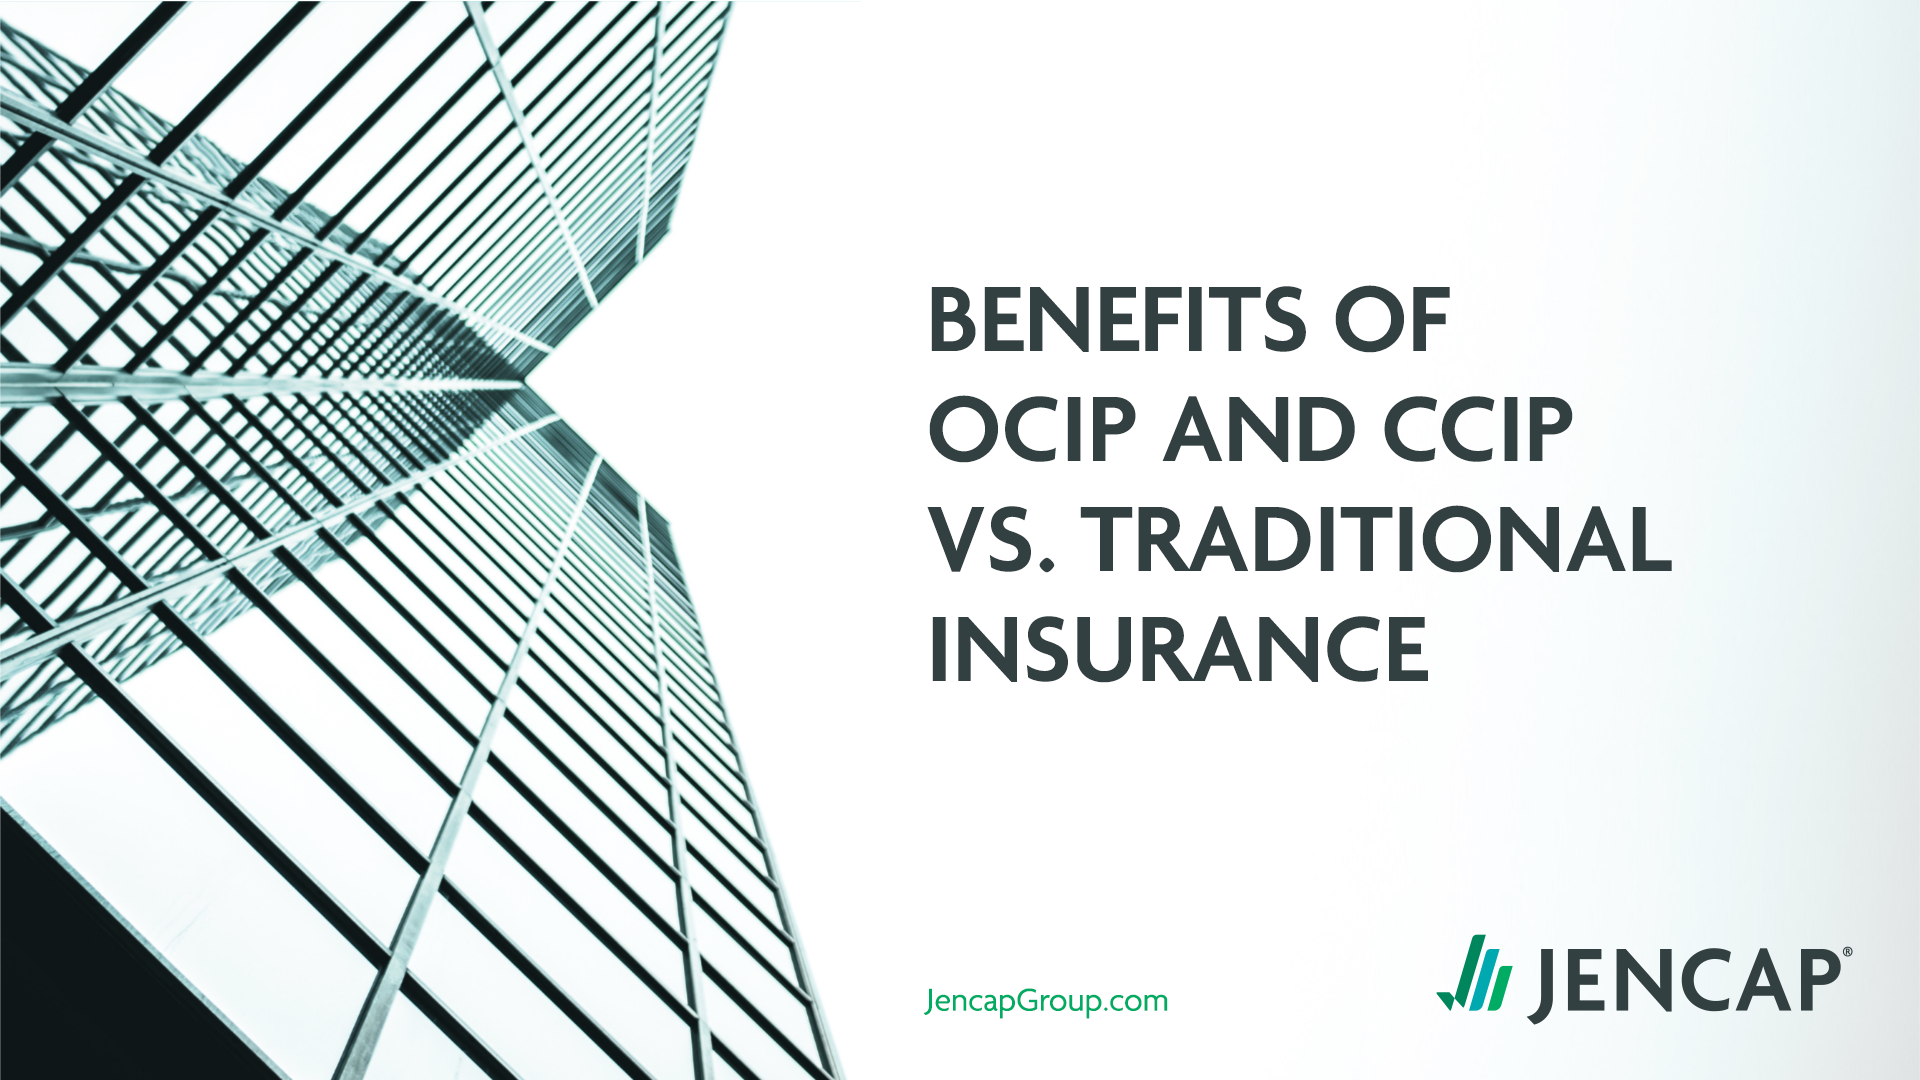 Benefits of OCIP and CCIP vs Traditional Insurance